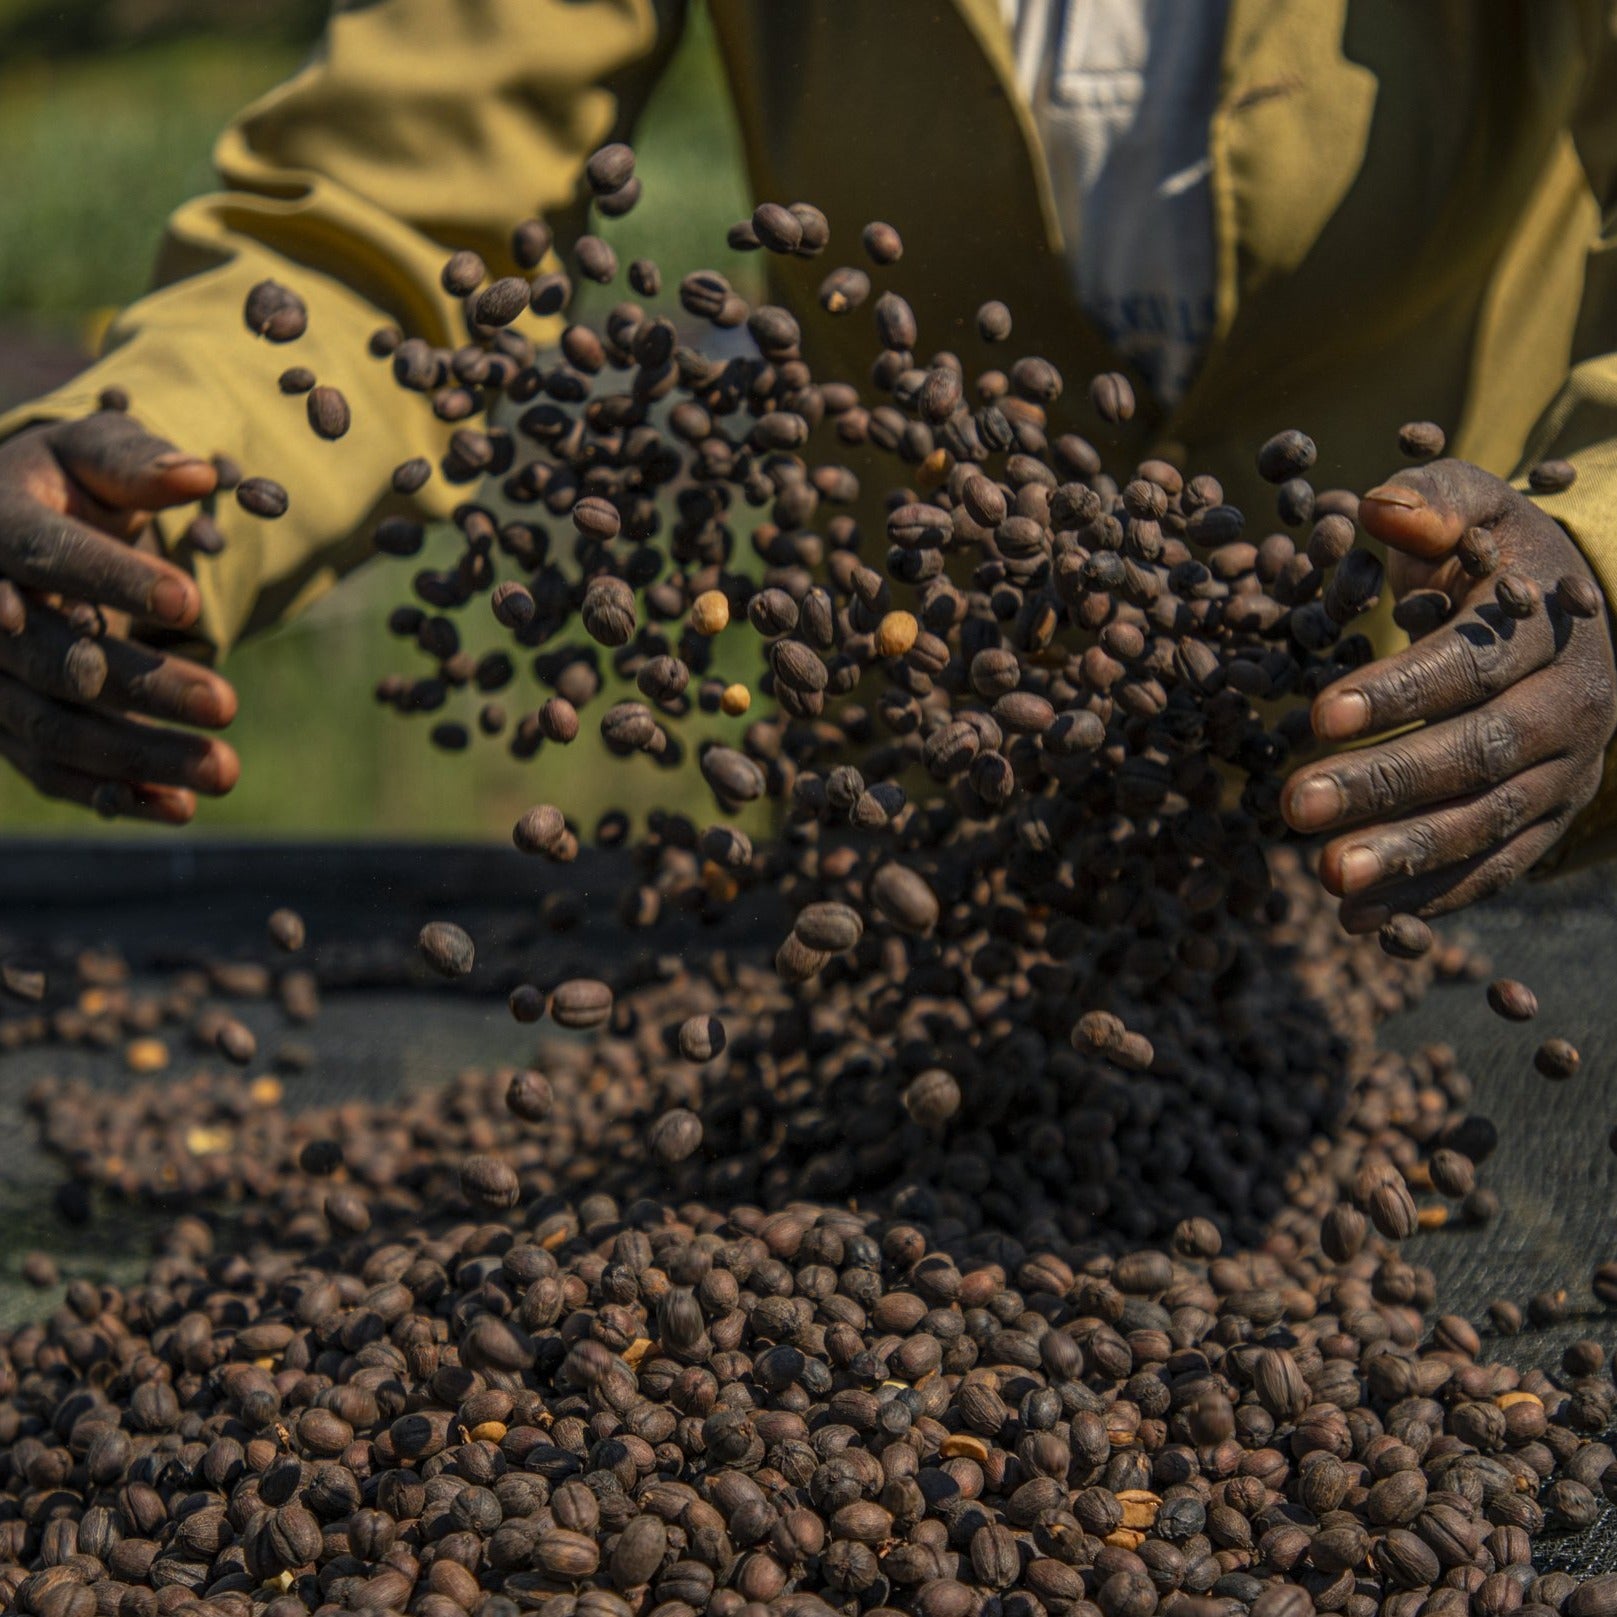 man from Rwanda raking coffee cherry pods on raised beds.  This is part of the dry, or natural process for coffee, where the coffee seeds are dried inside of the fruit, resulting in a sweeter and fruiter coffee. After drying for 14-21 days or around 12% moisture content the green coffee beans are removed from the cherry pods, and packaged for export.